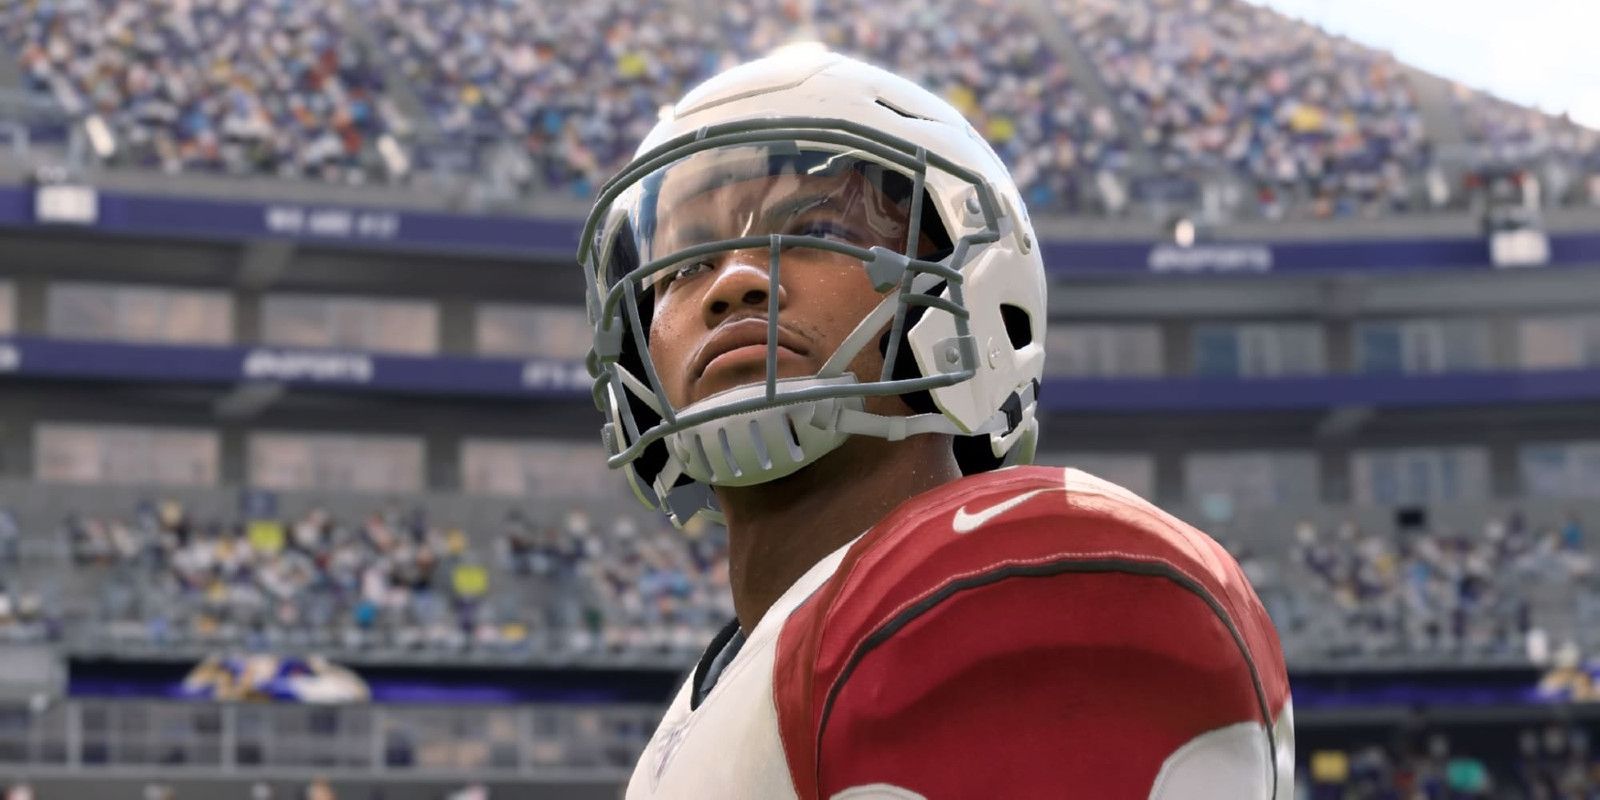 Madden NFL 21' PS5: EA's strategy to weasel out of Smart Delivery